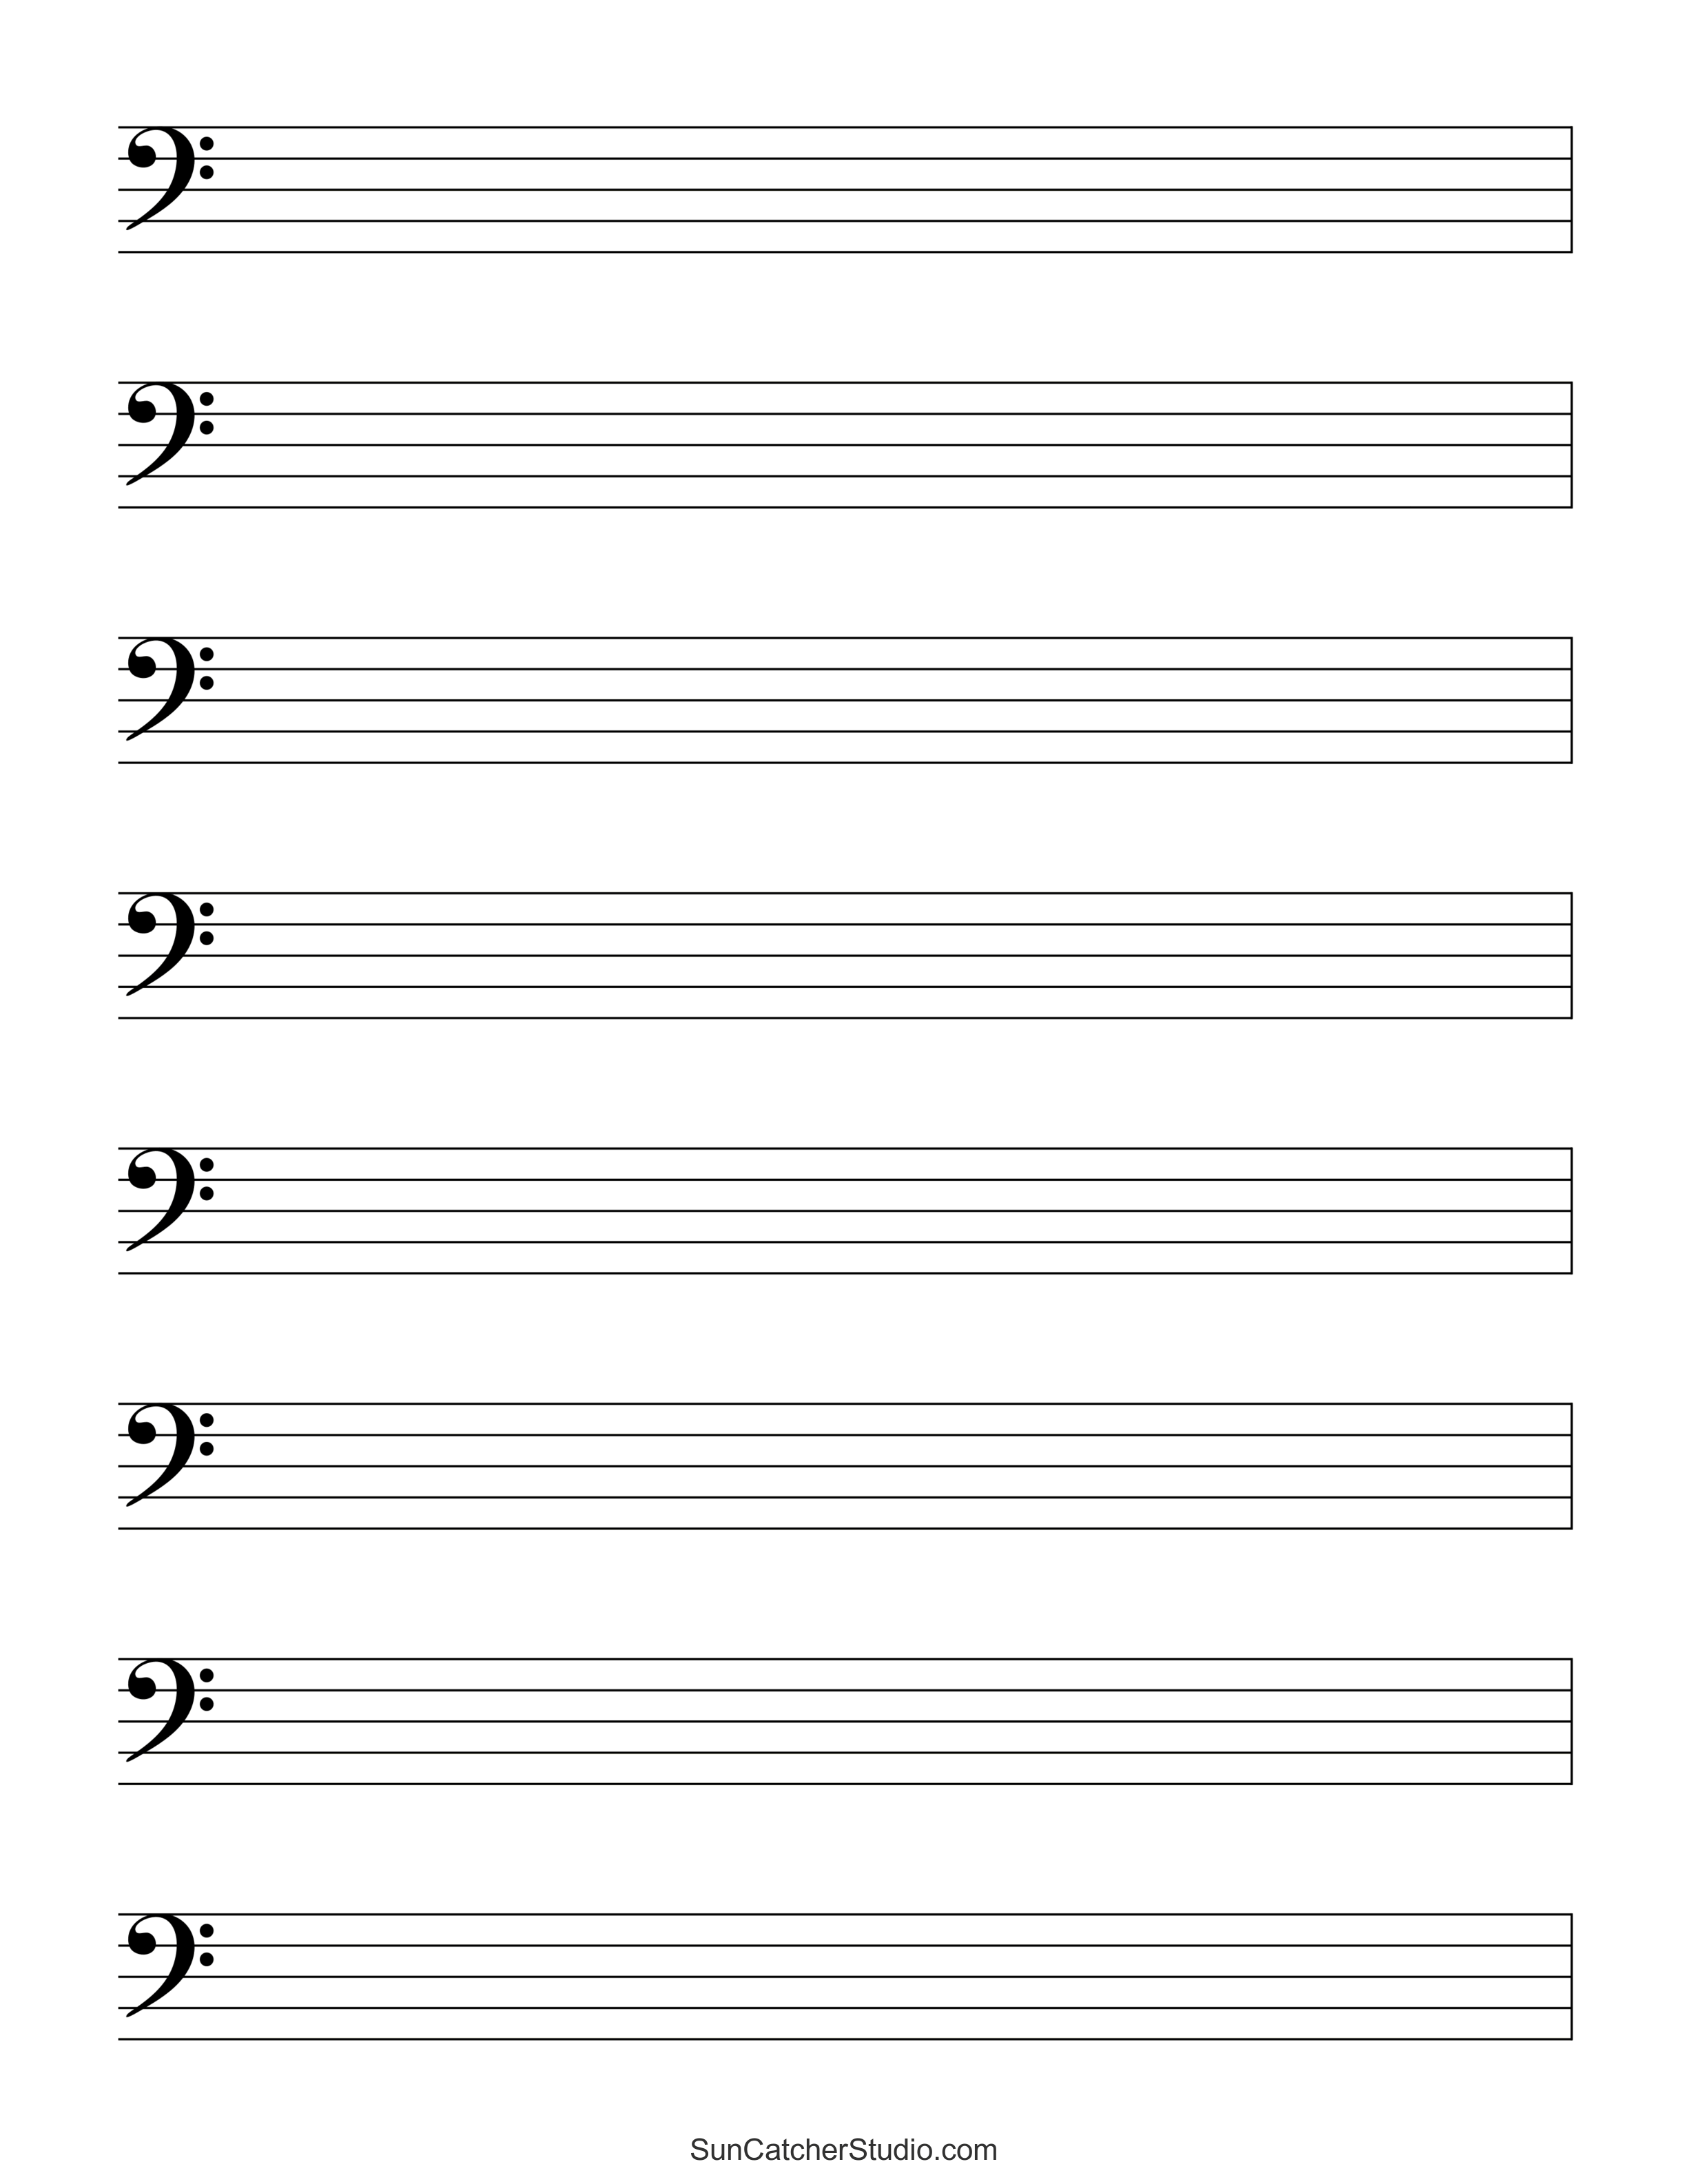 blank-sheet-music-free-printable-staff-paper-diy-projects-patterns